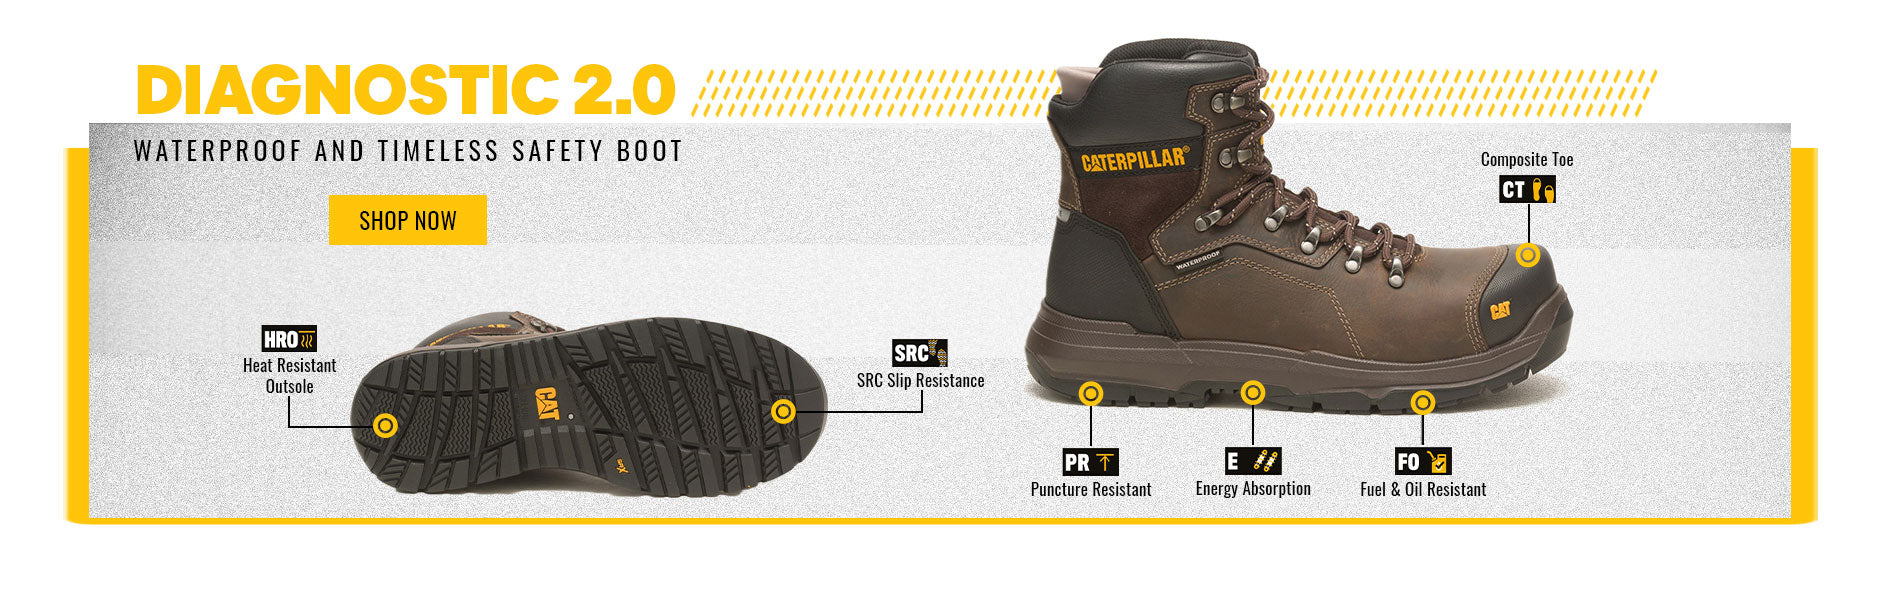 Images of a Caterpillar Diagnostic 2.0 Safety Boot in side profile and outsole, with technical features around the outside